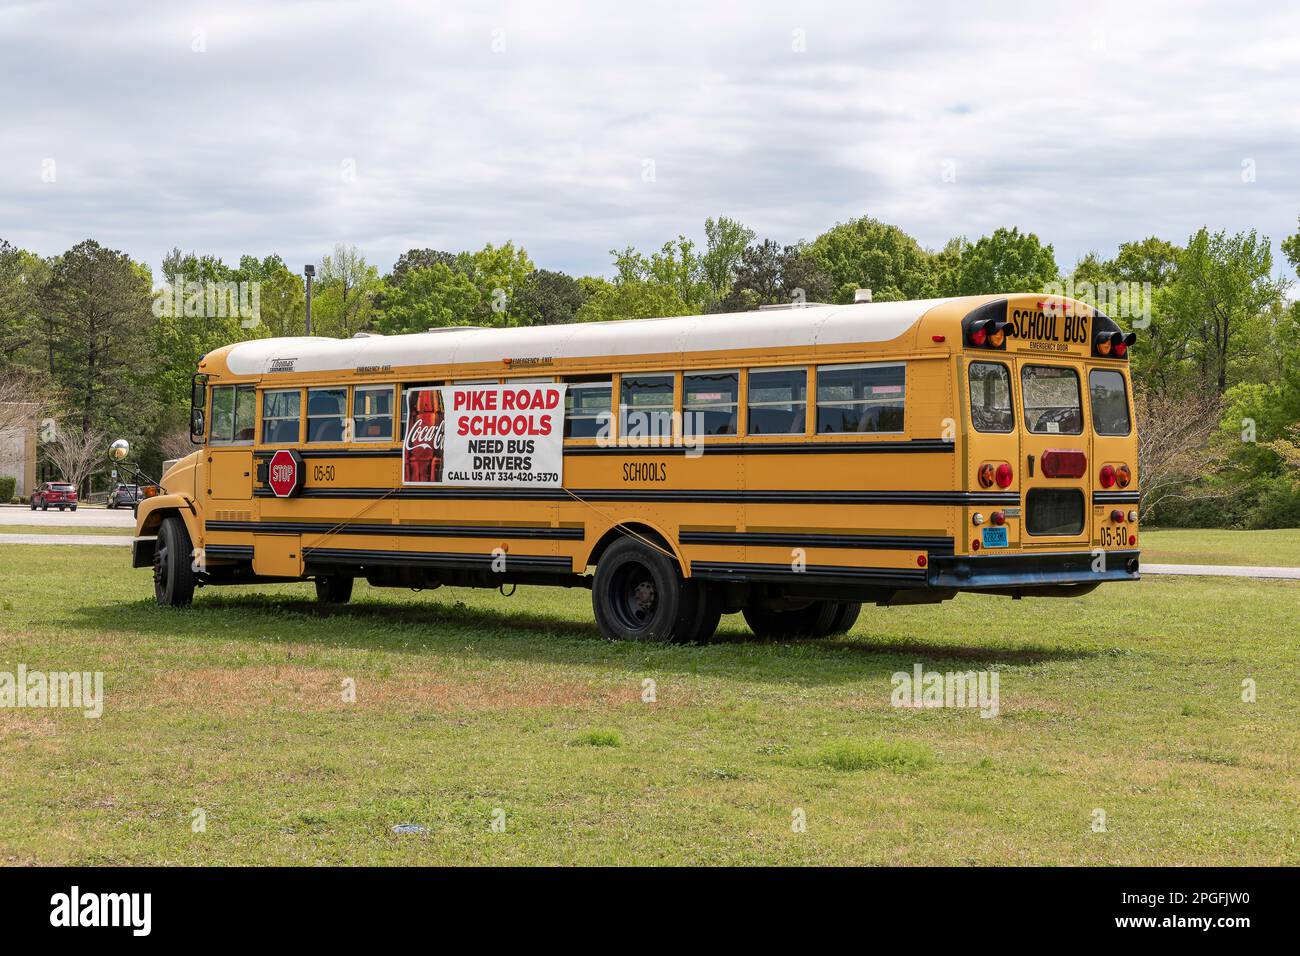 Parked school bus with drivers wanted or help wanted sign on the side of the bus advertising for school bus drivers in Pike Road Alabama, USA. Stock Photo